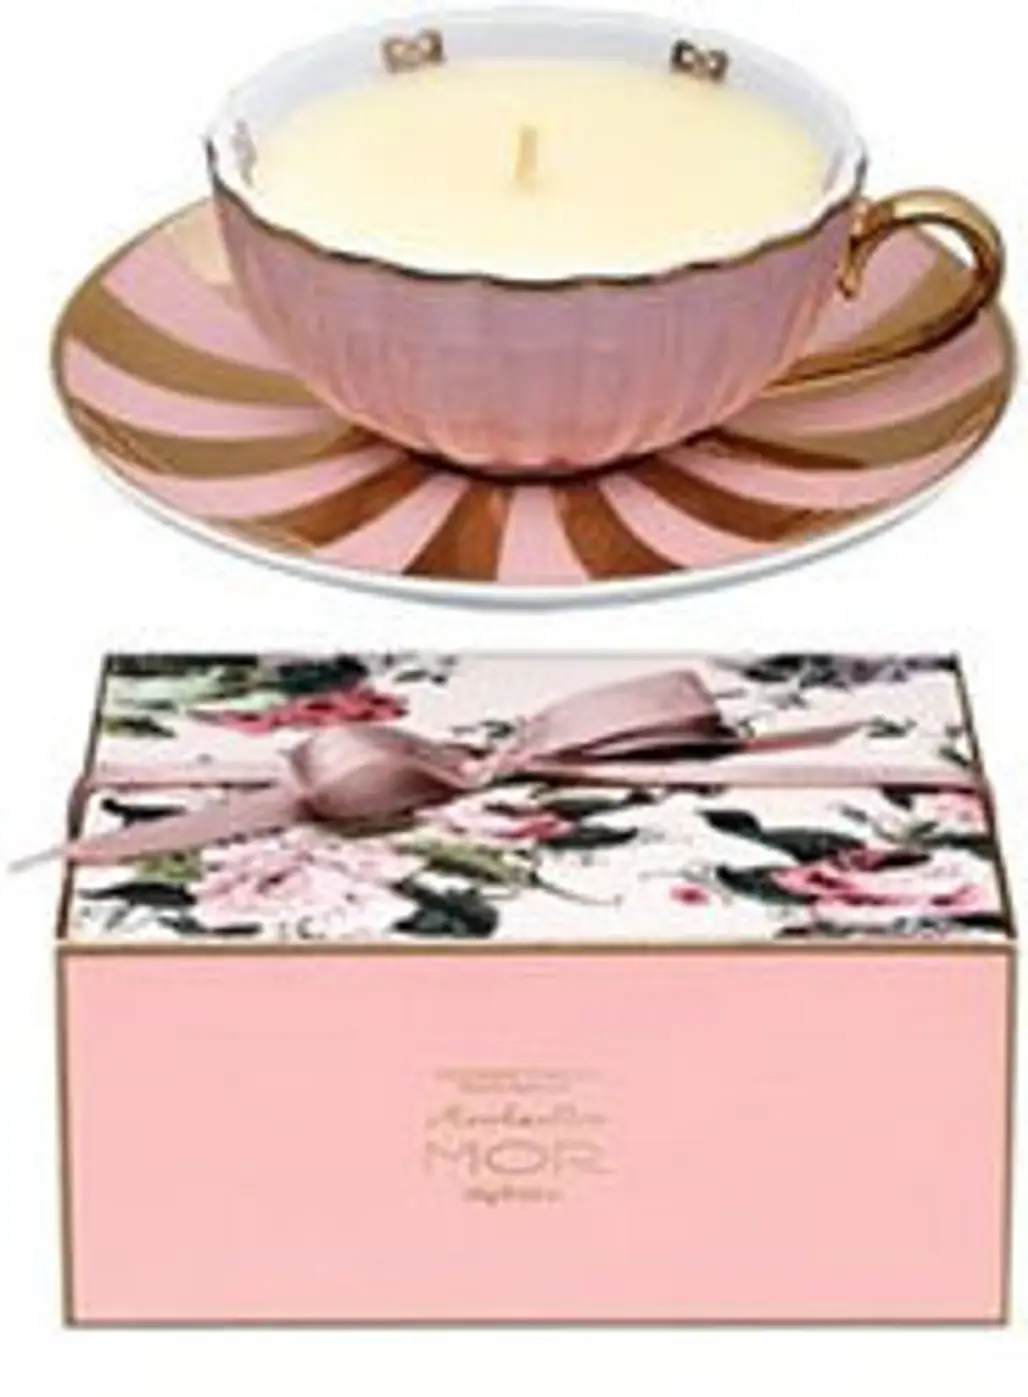 MOR Marshmallow Fragrance Tea Cup Candle